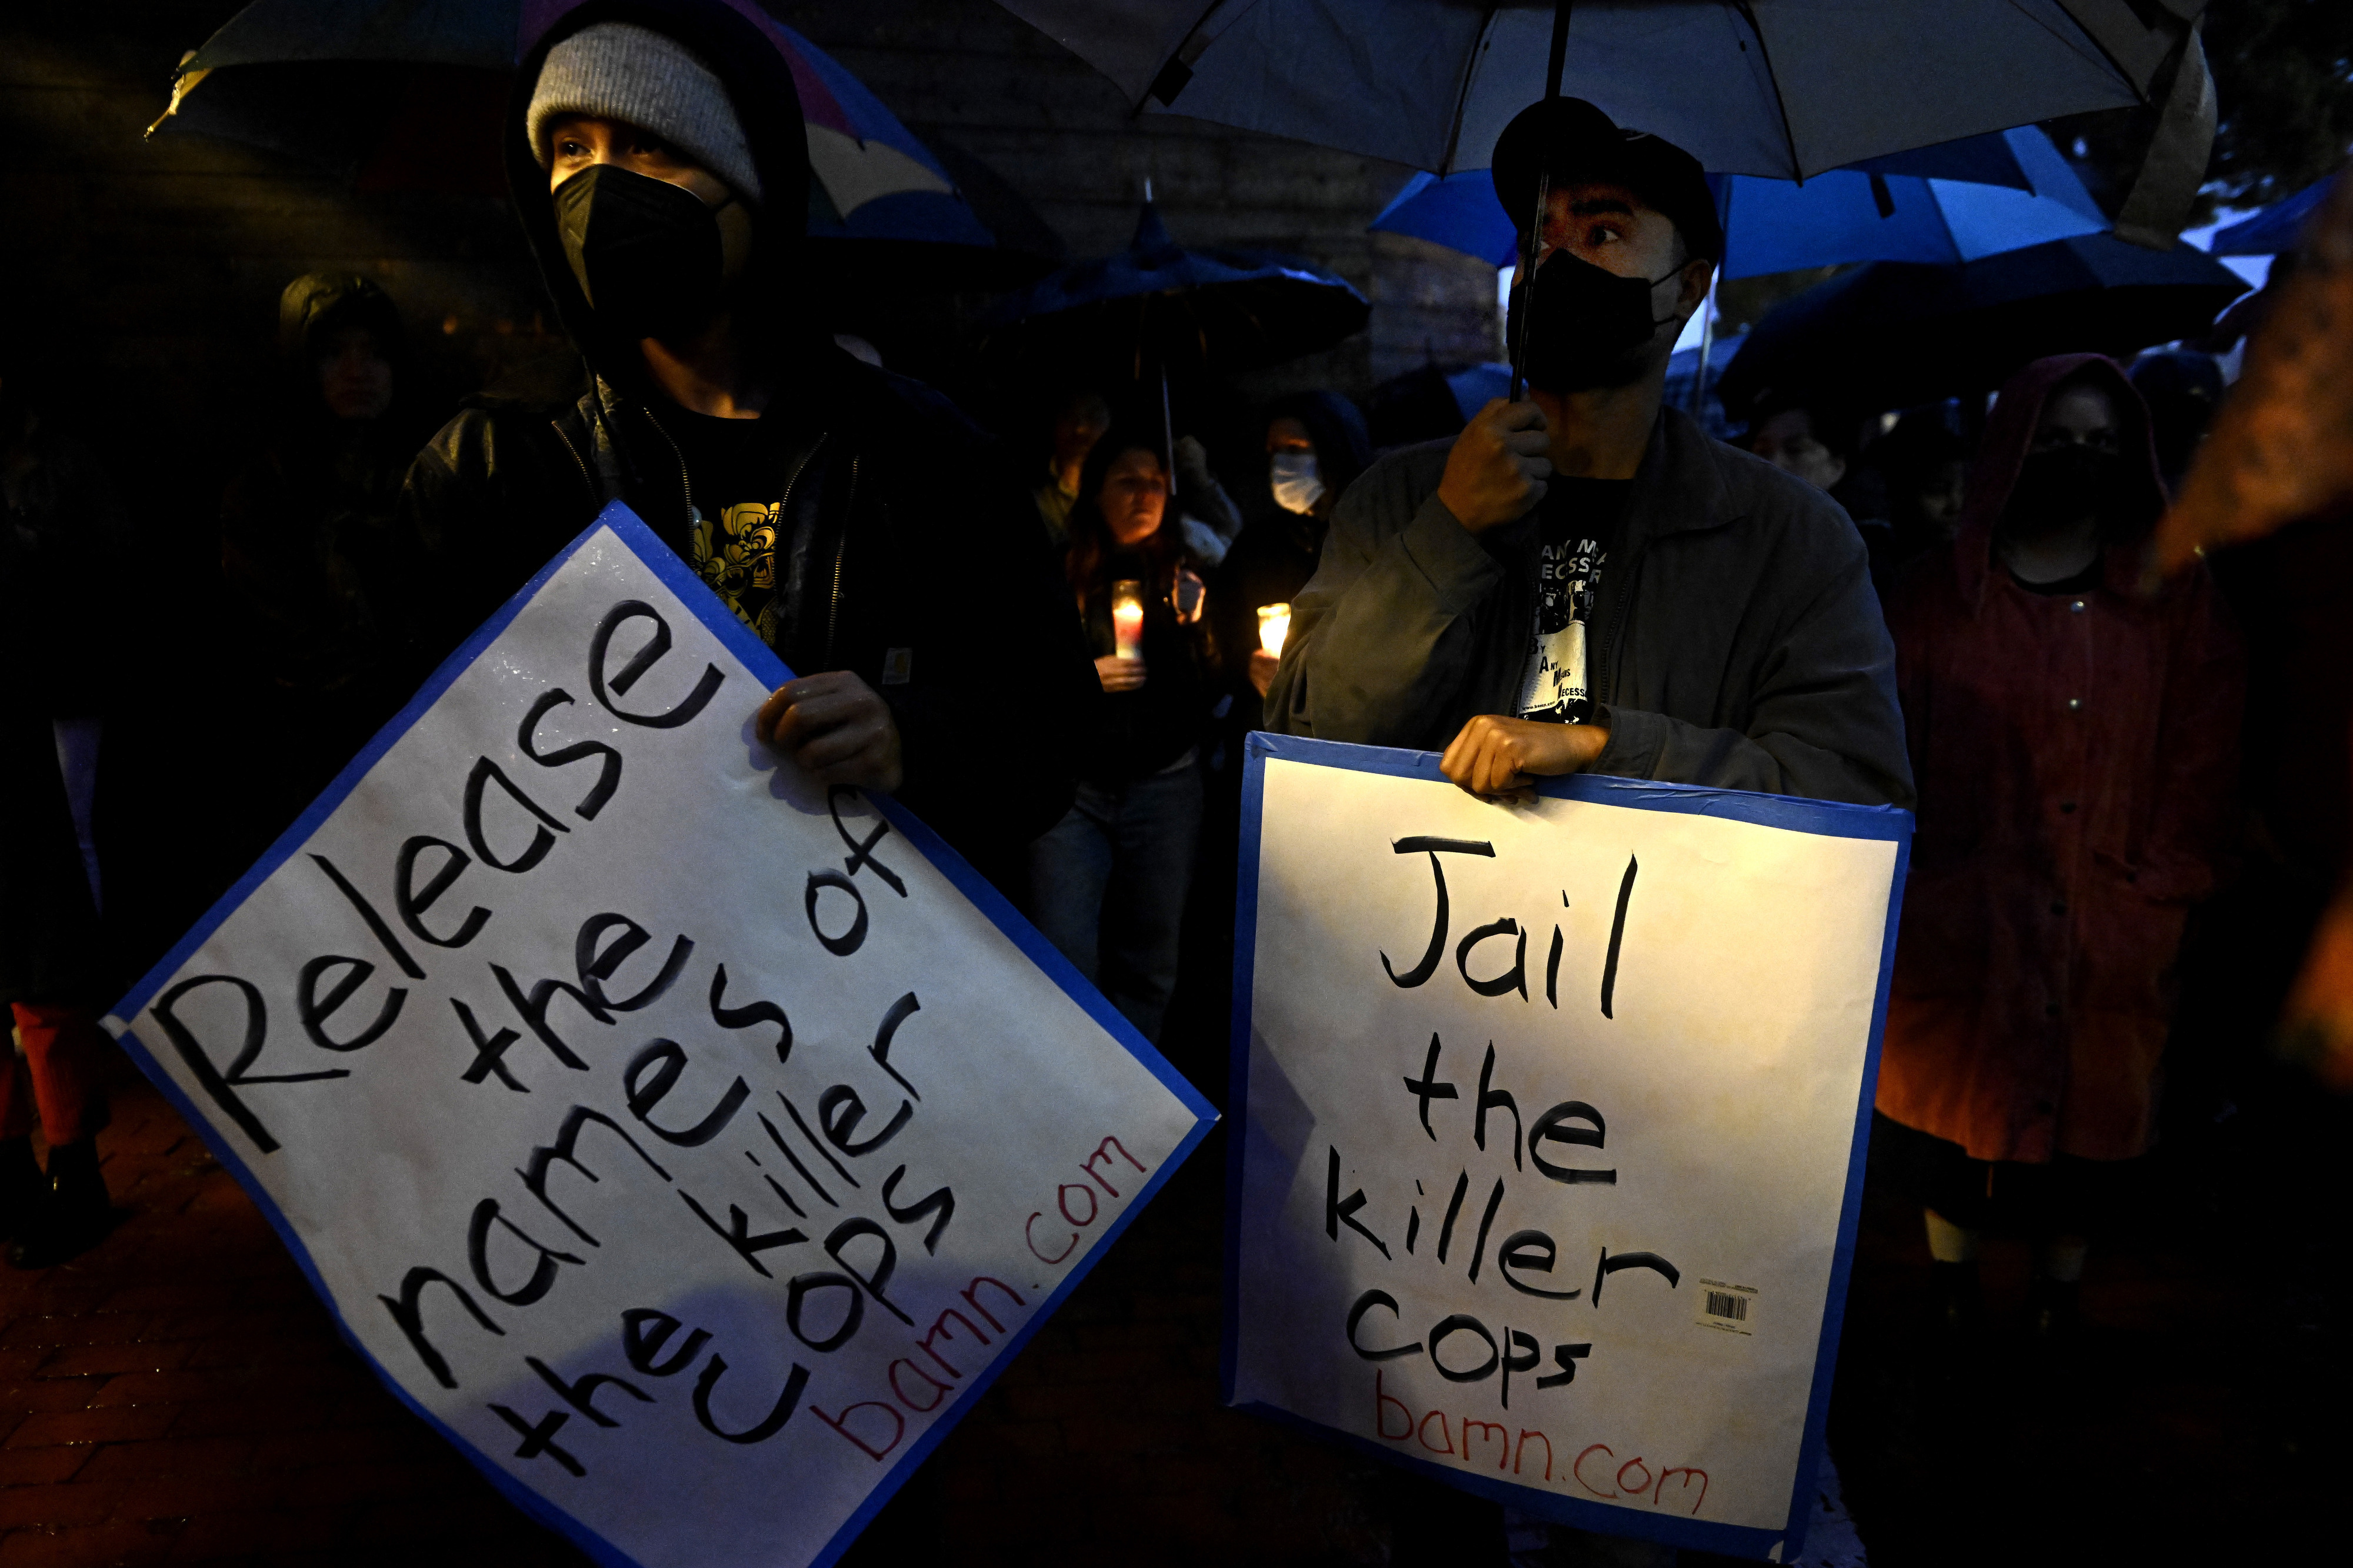 People hold up signs asking for the release of the LAPD officers names that were involved and for them to be jailed during a vigil in Los Angeles on Saturday, Jan. 14, 2023, for Keenan Anderson.